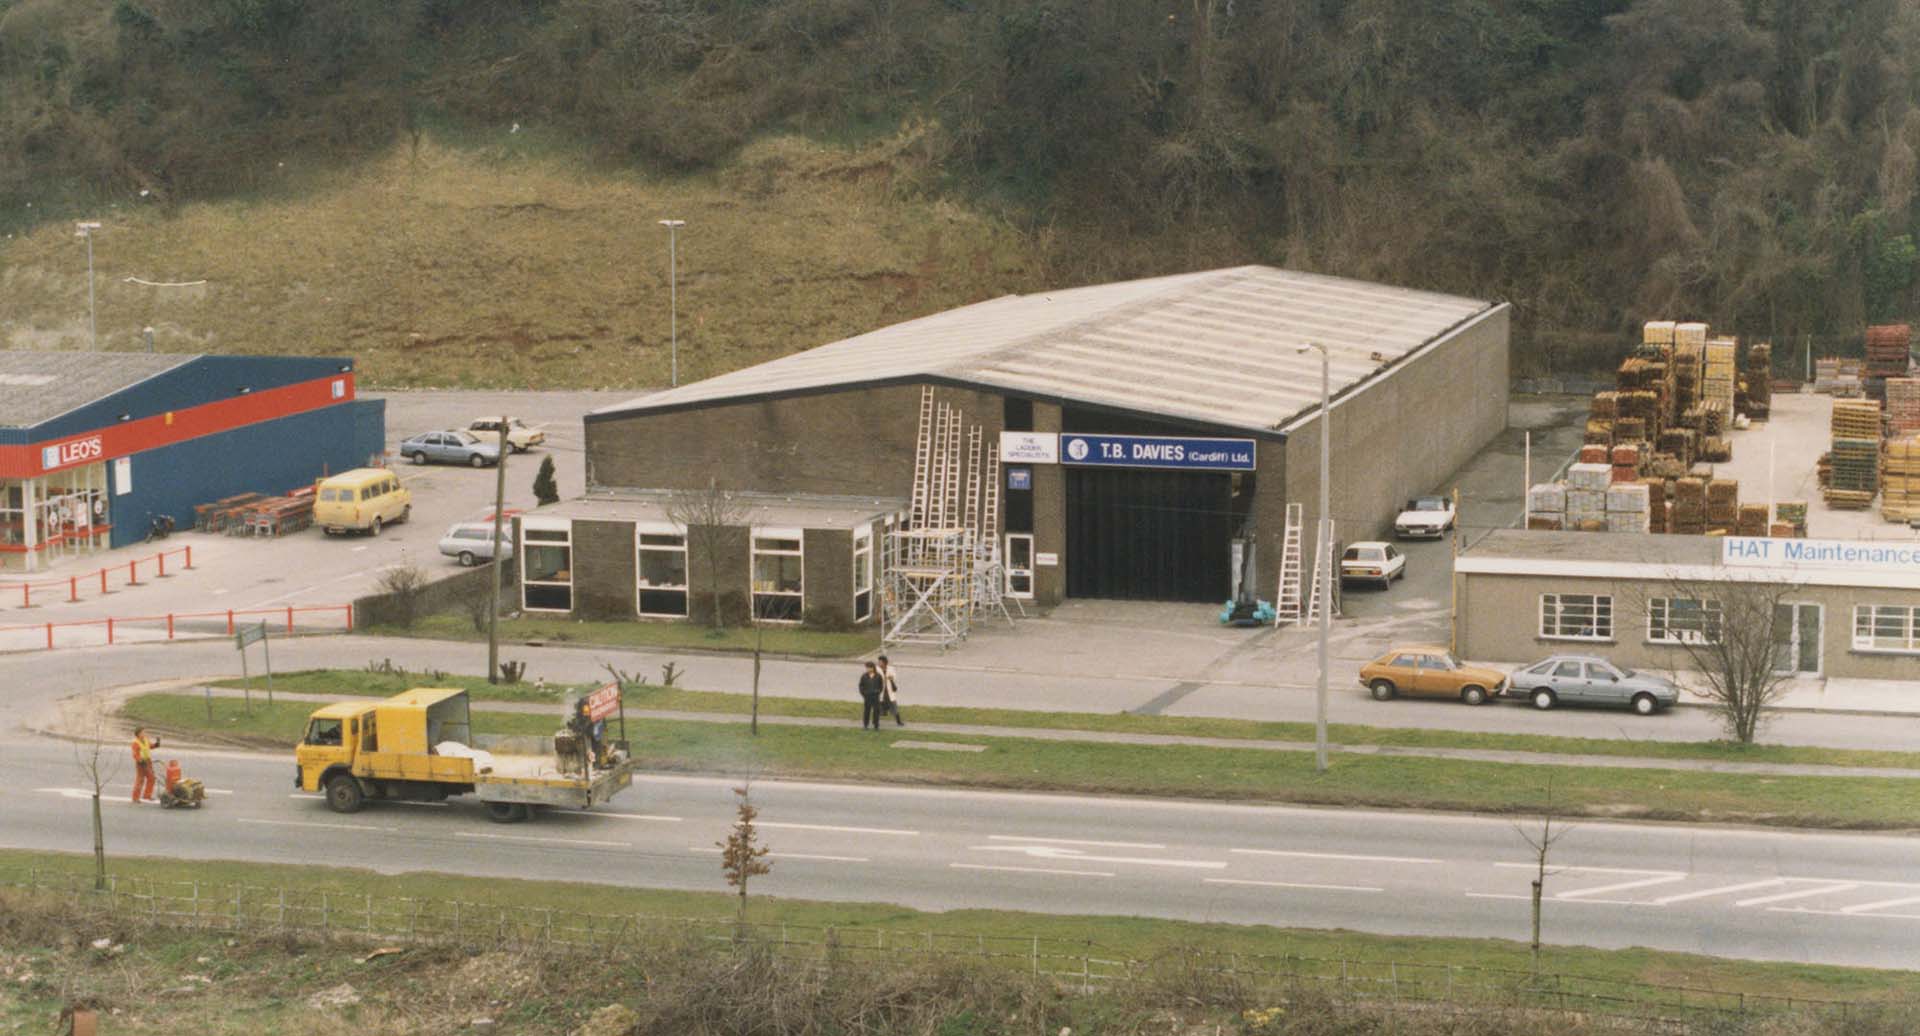 The TB Davies warehouse purchased in 1984